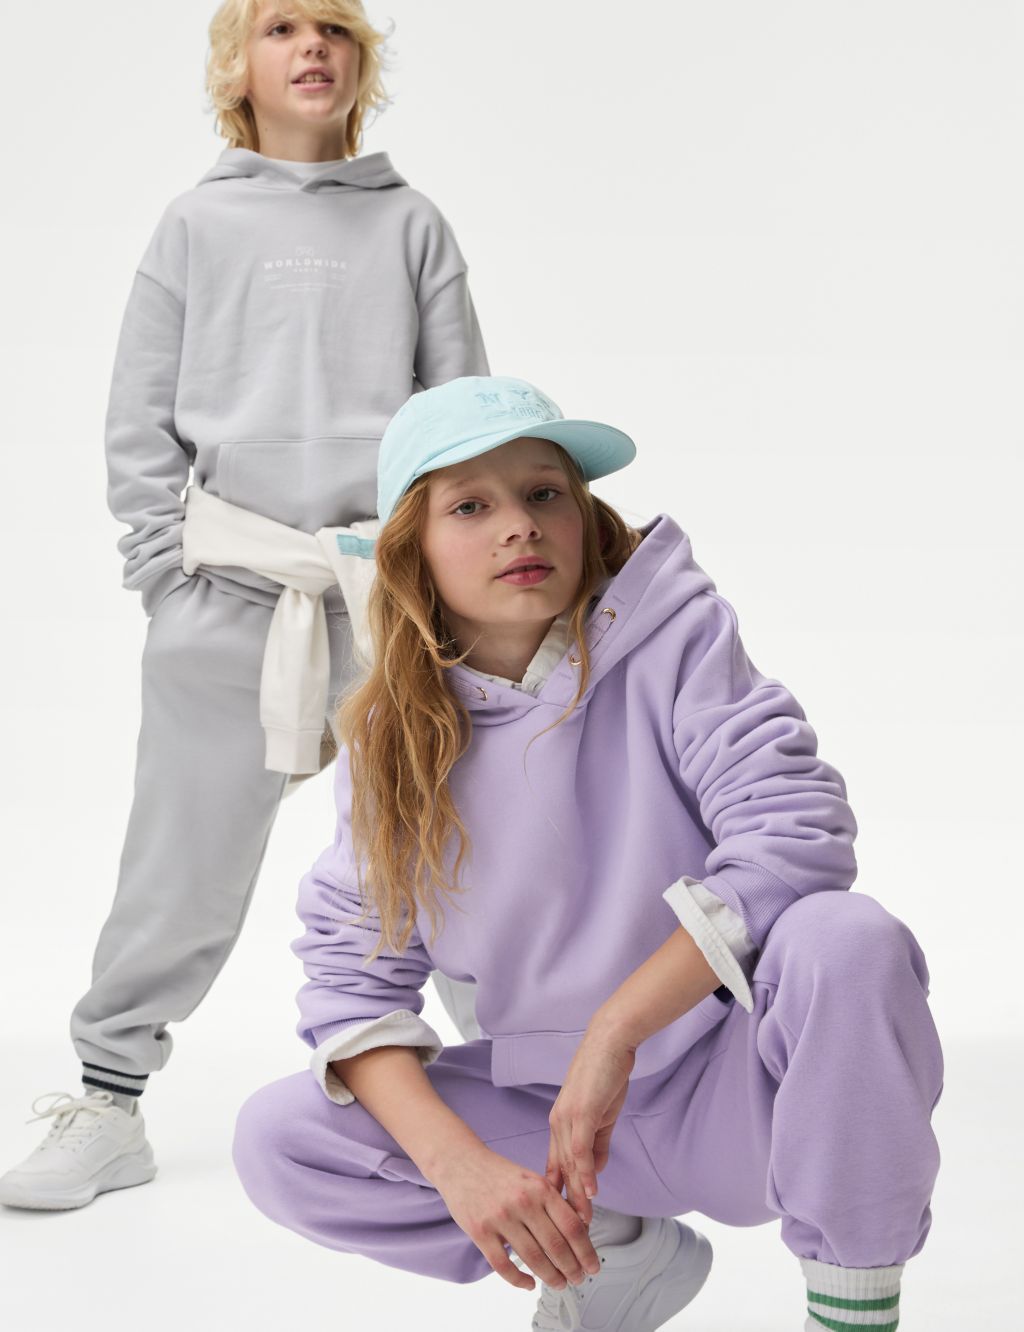 Cotton Rich Oversized Hoodie (6-16 Yrs)